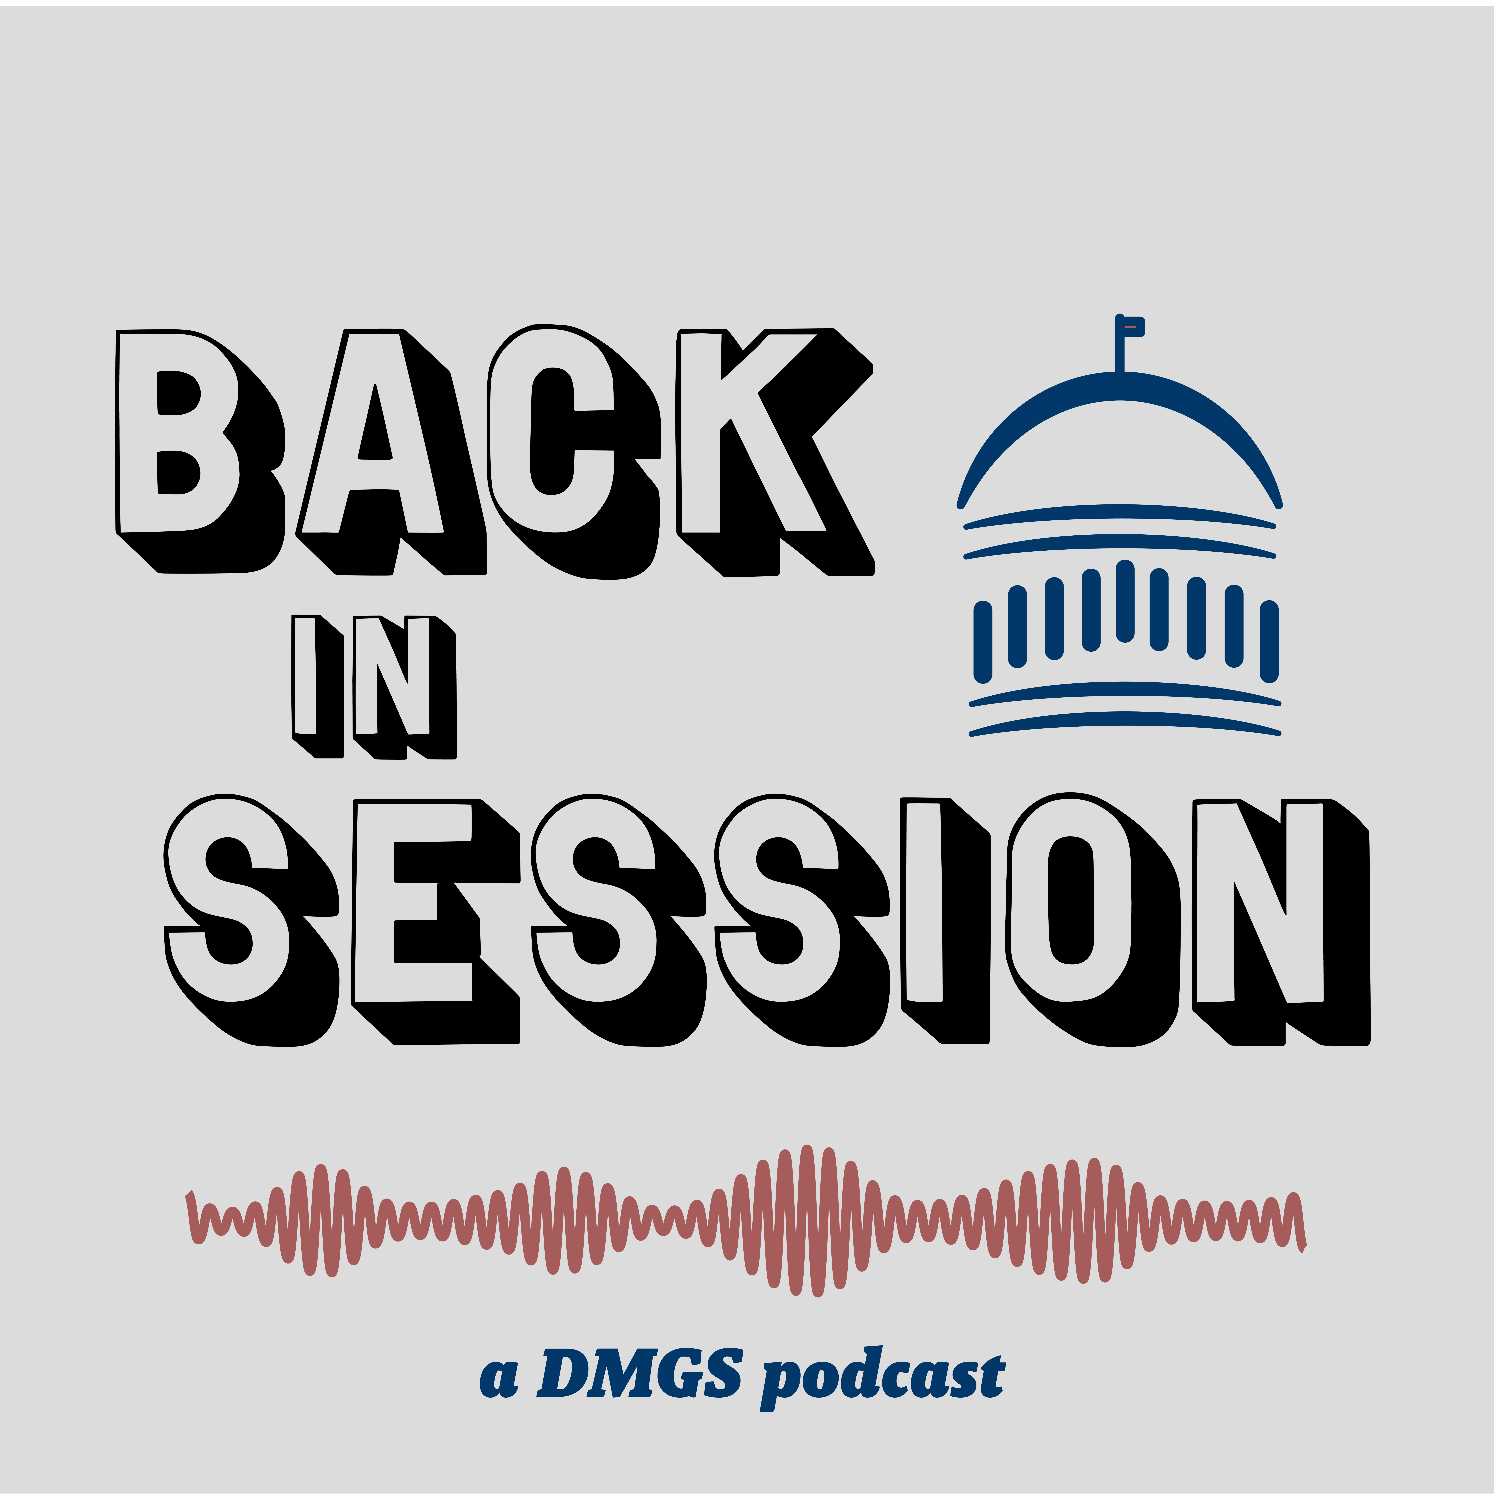 Back in Session: A DMGS Podcast